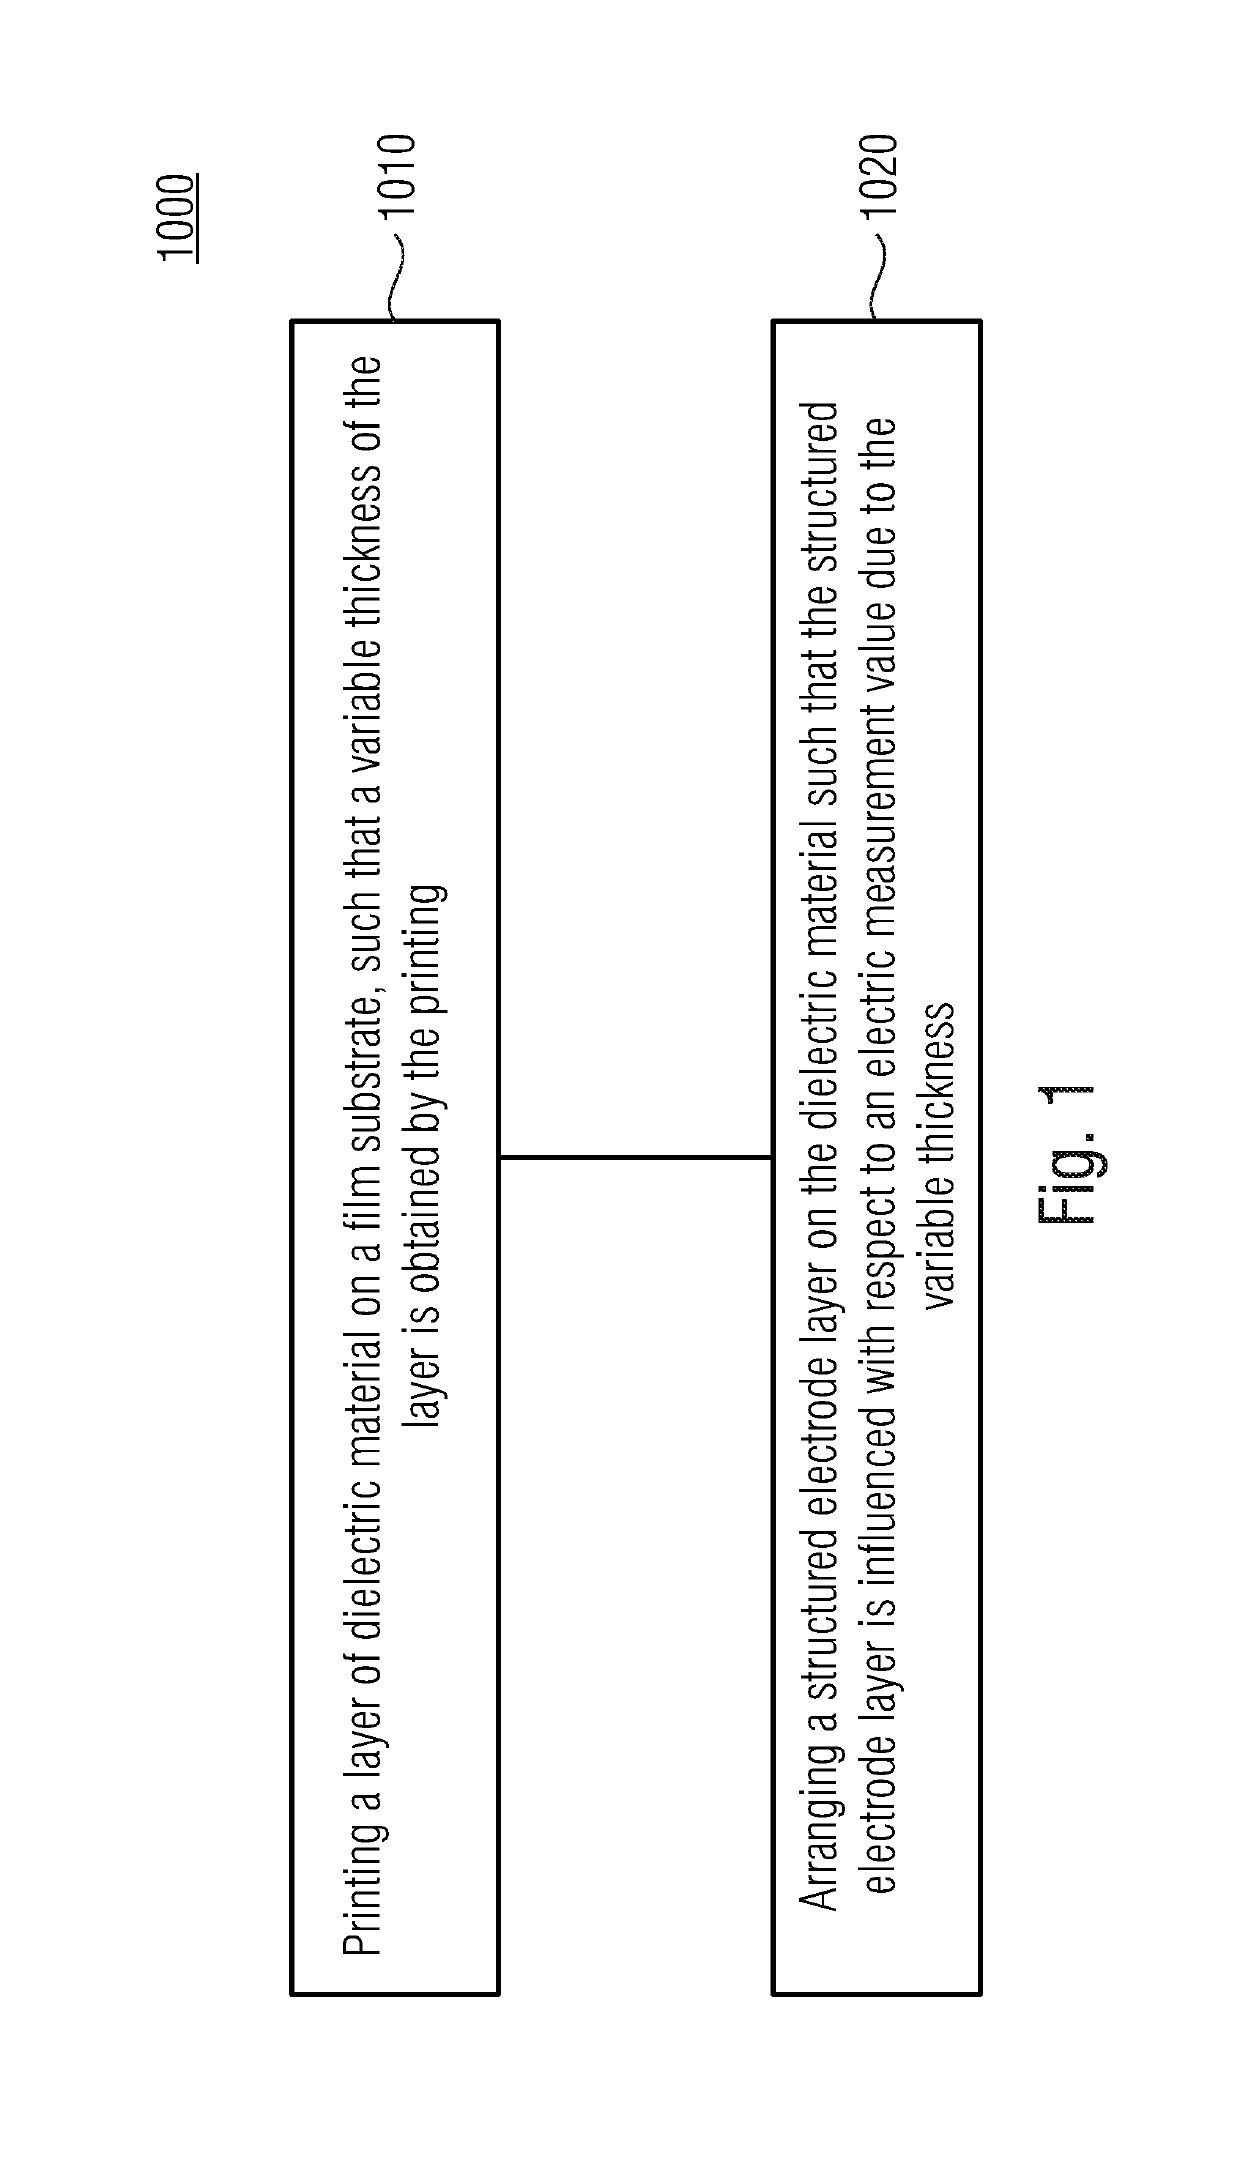 PUF-Film and Method for Producing the Same